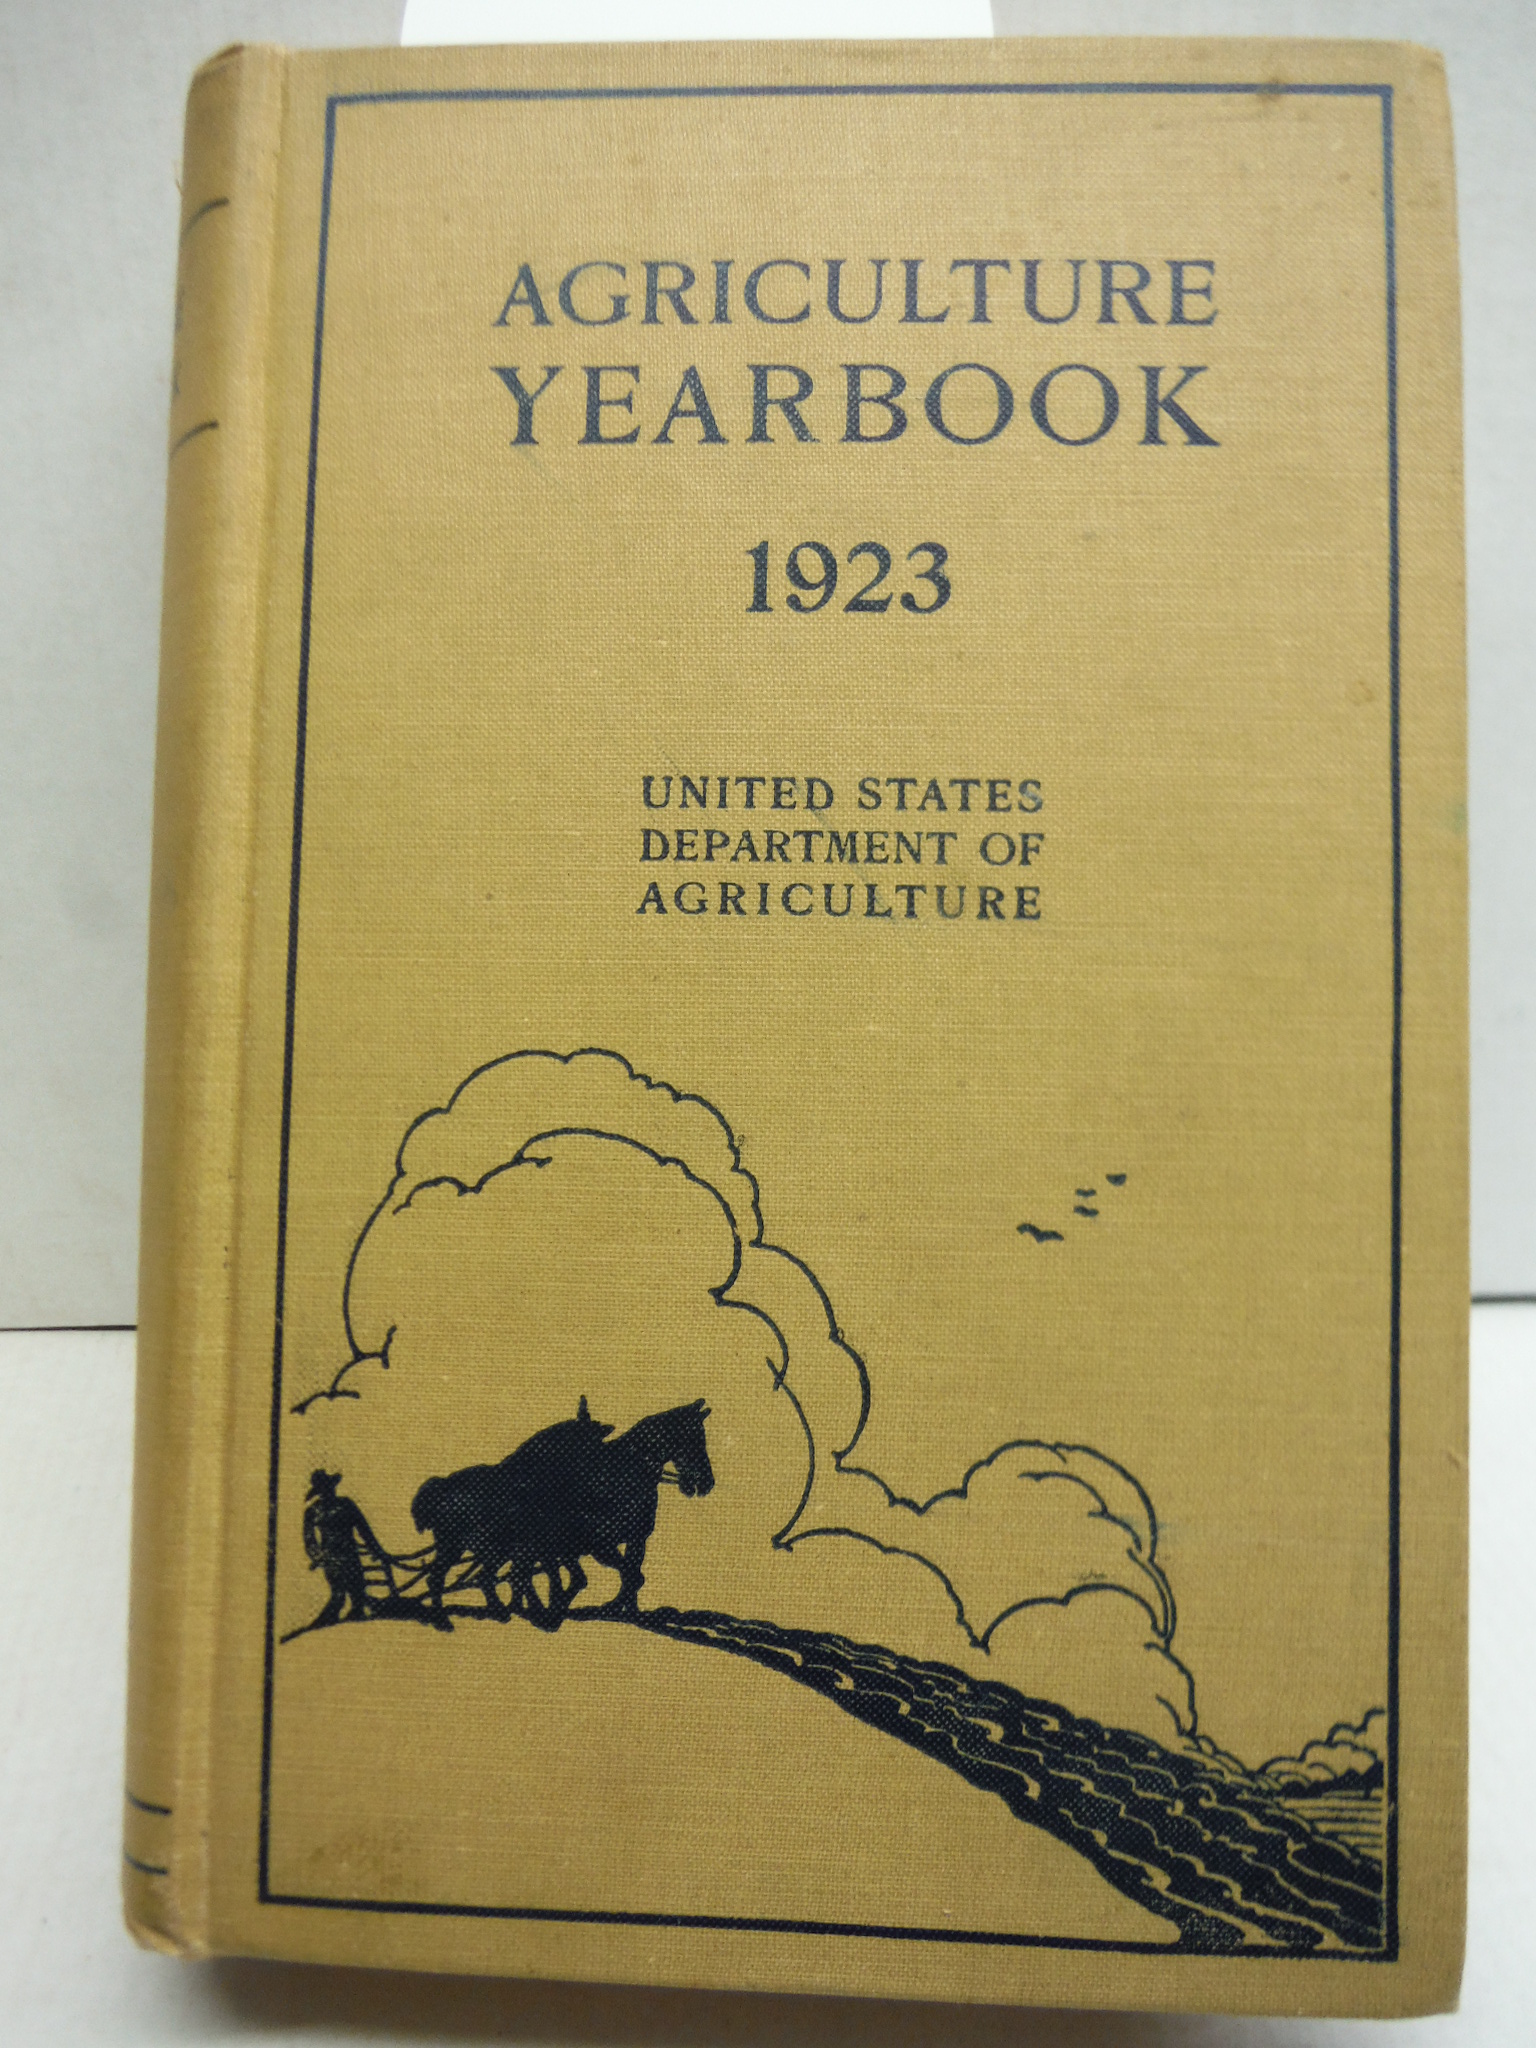  Agriculture Yearbook 1923